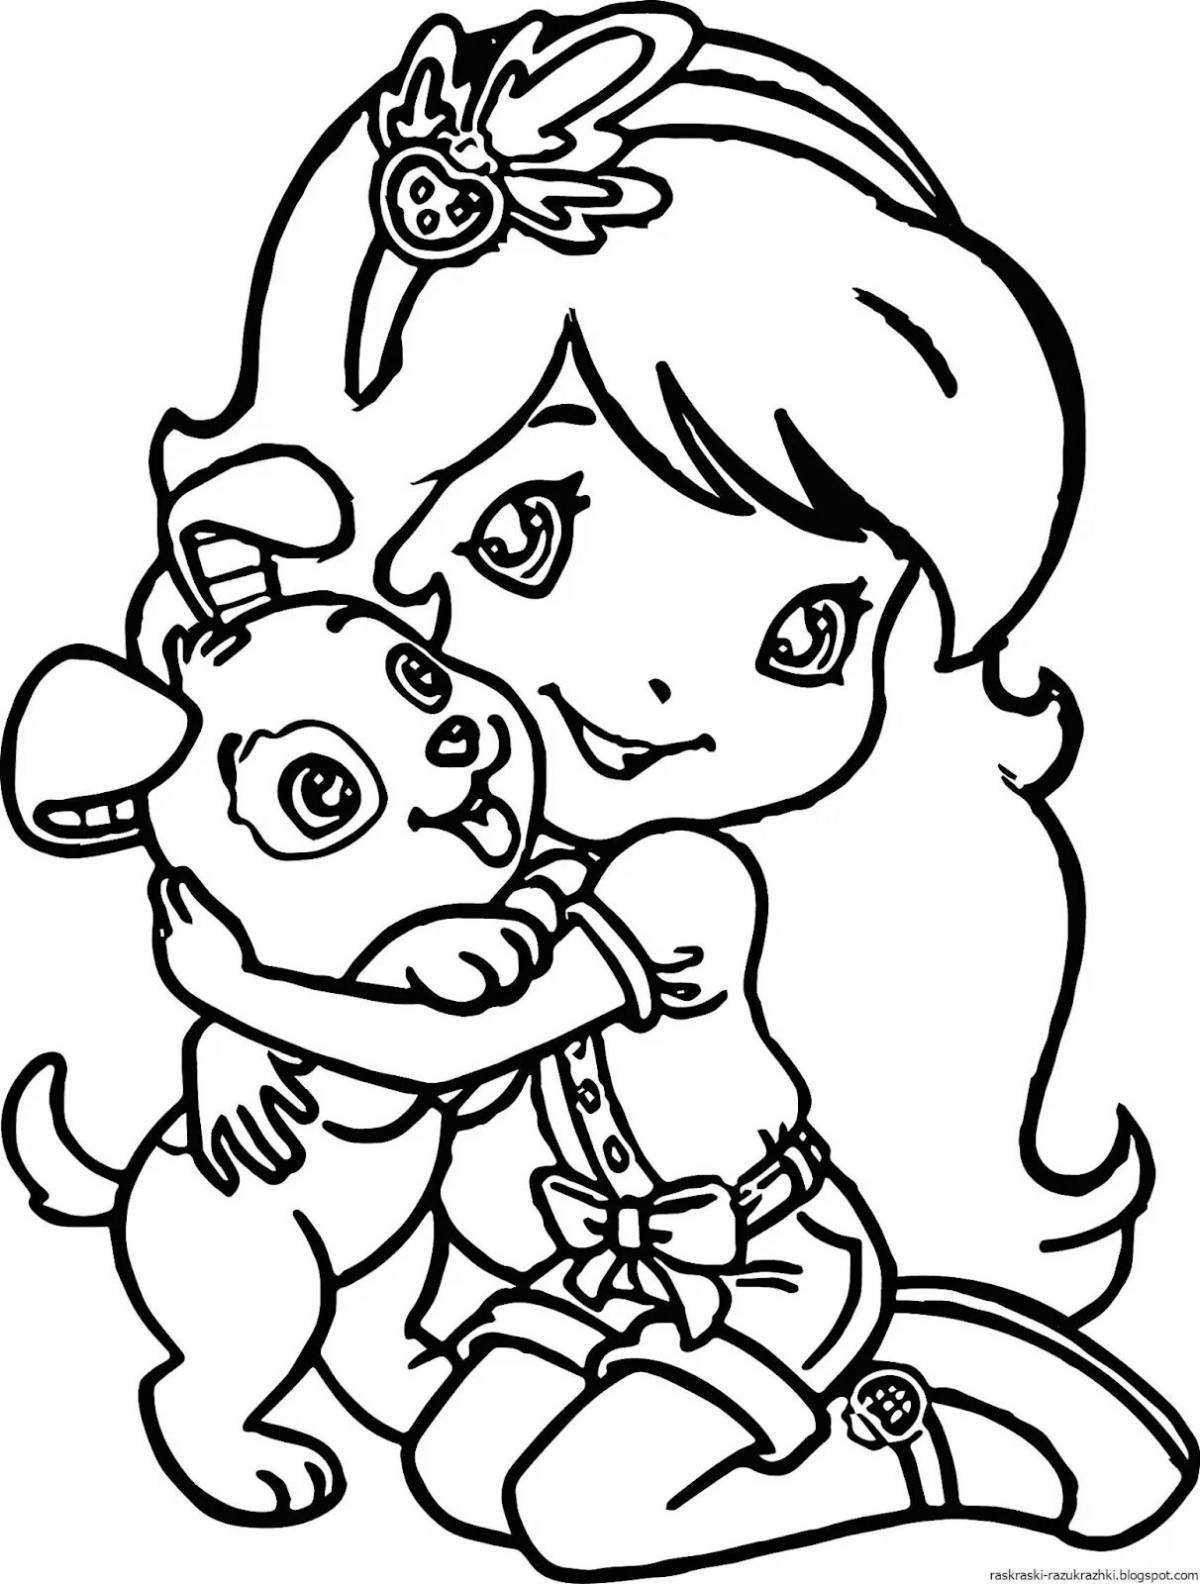 Coloring page 6 for girls